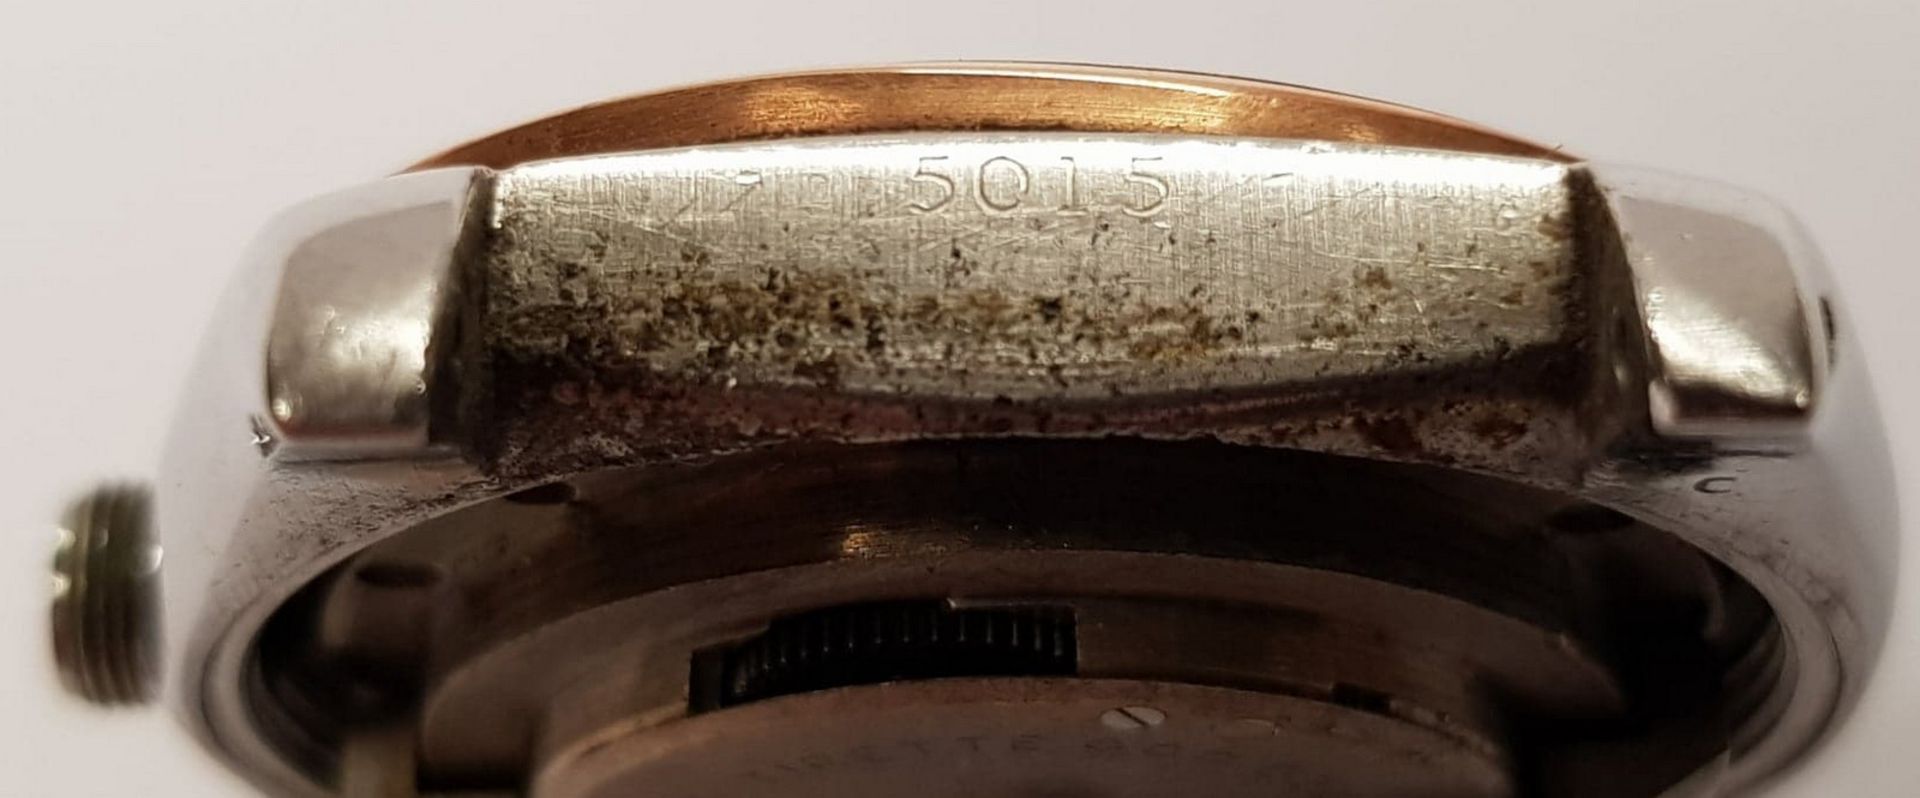 Rolex Oyster Perpetual Certified Chronometer Bubbleback Case Type 5015 For Restoration - Image 7 of 11